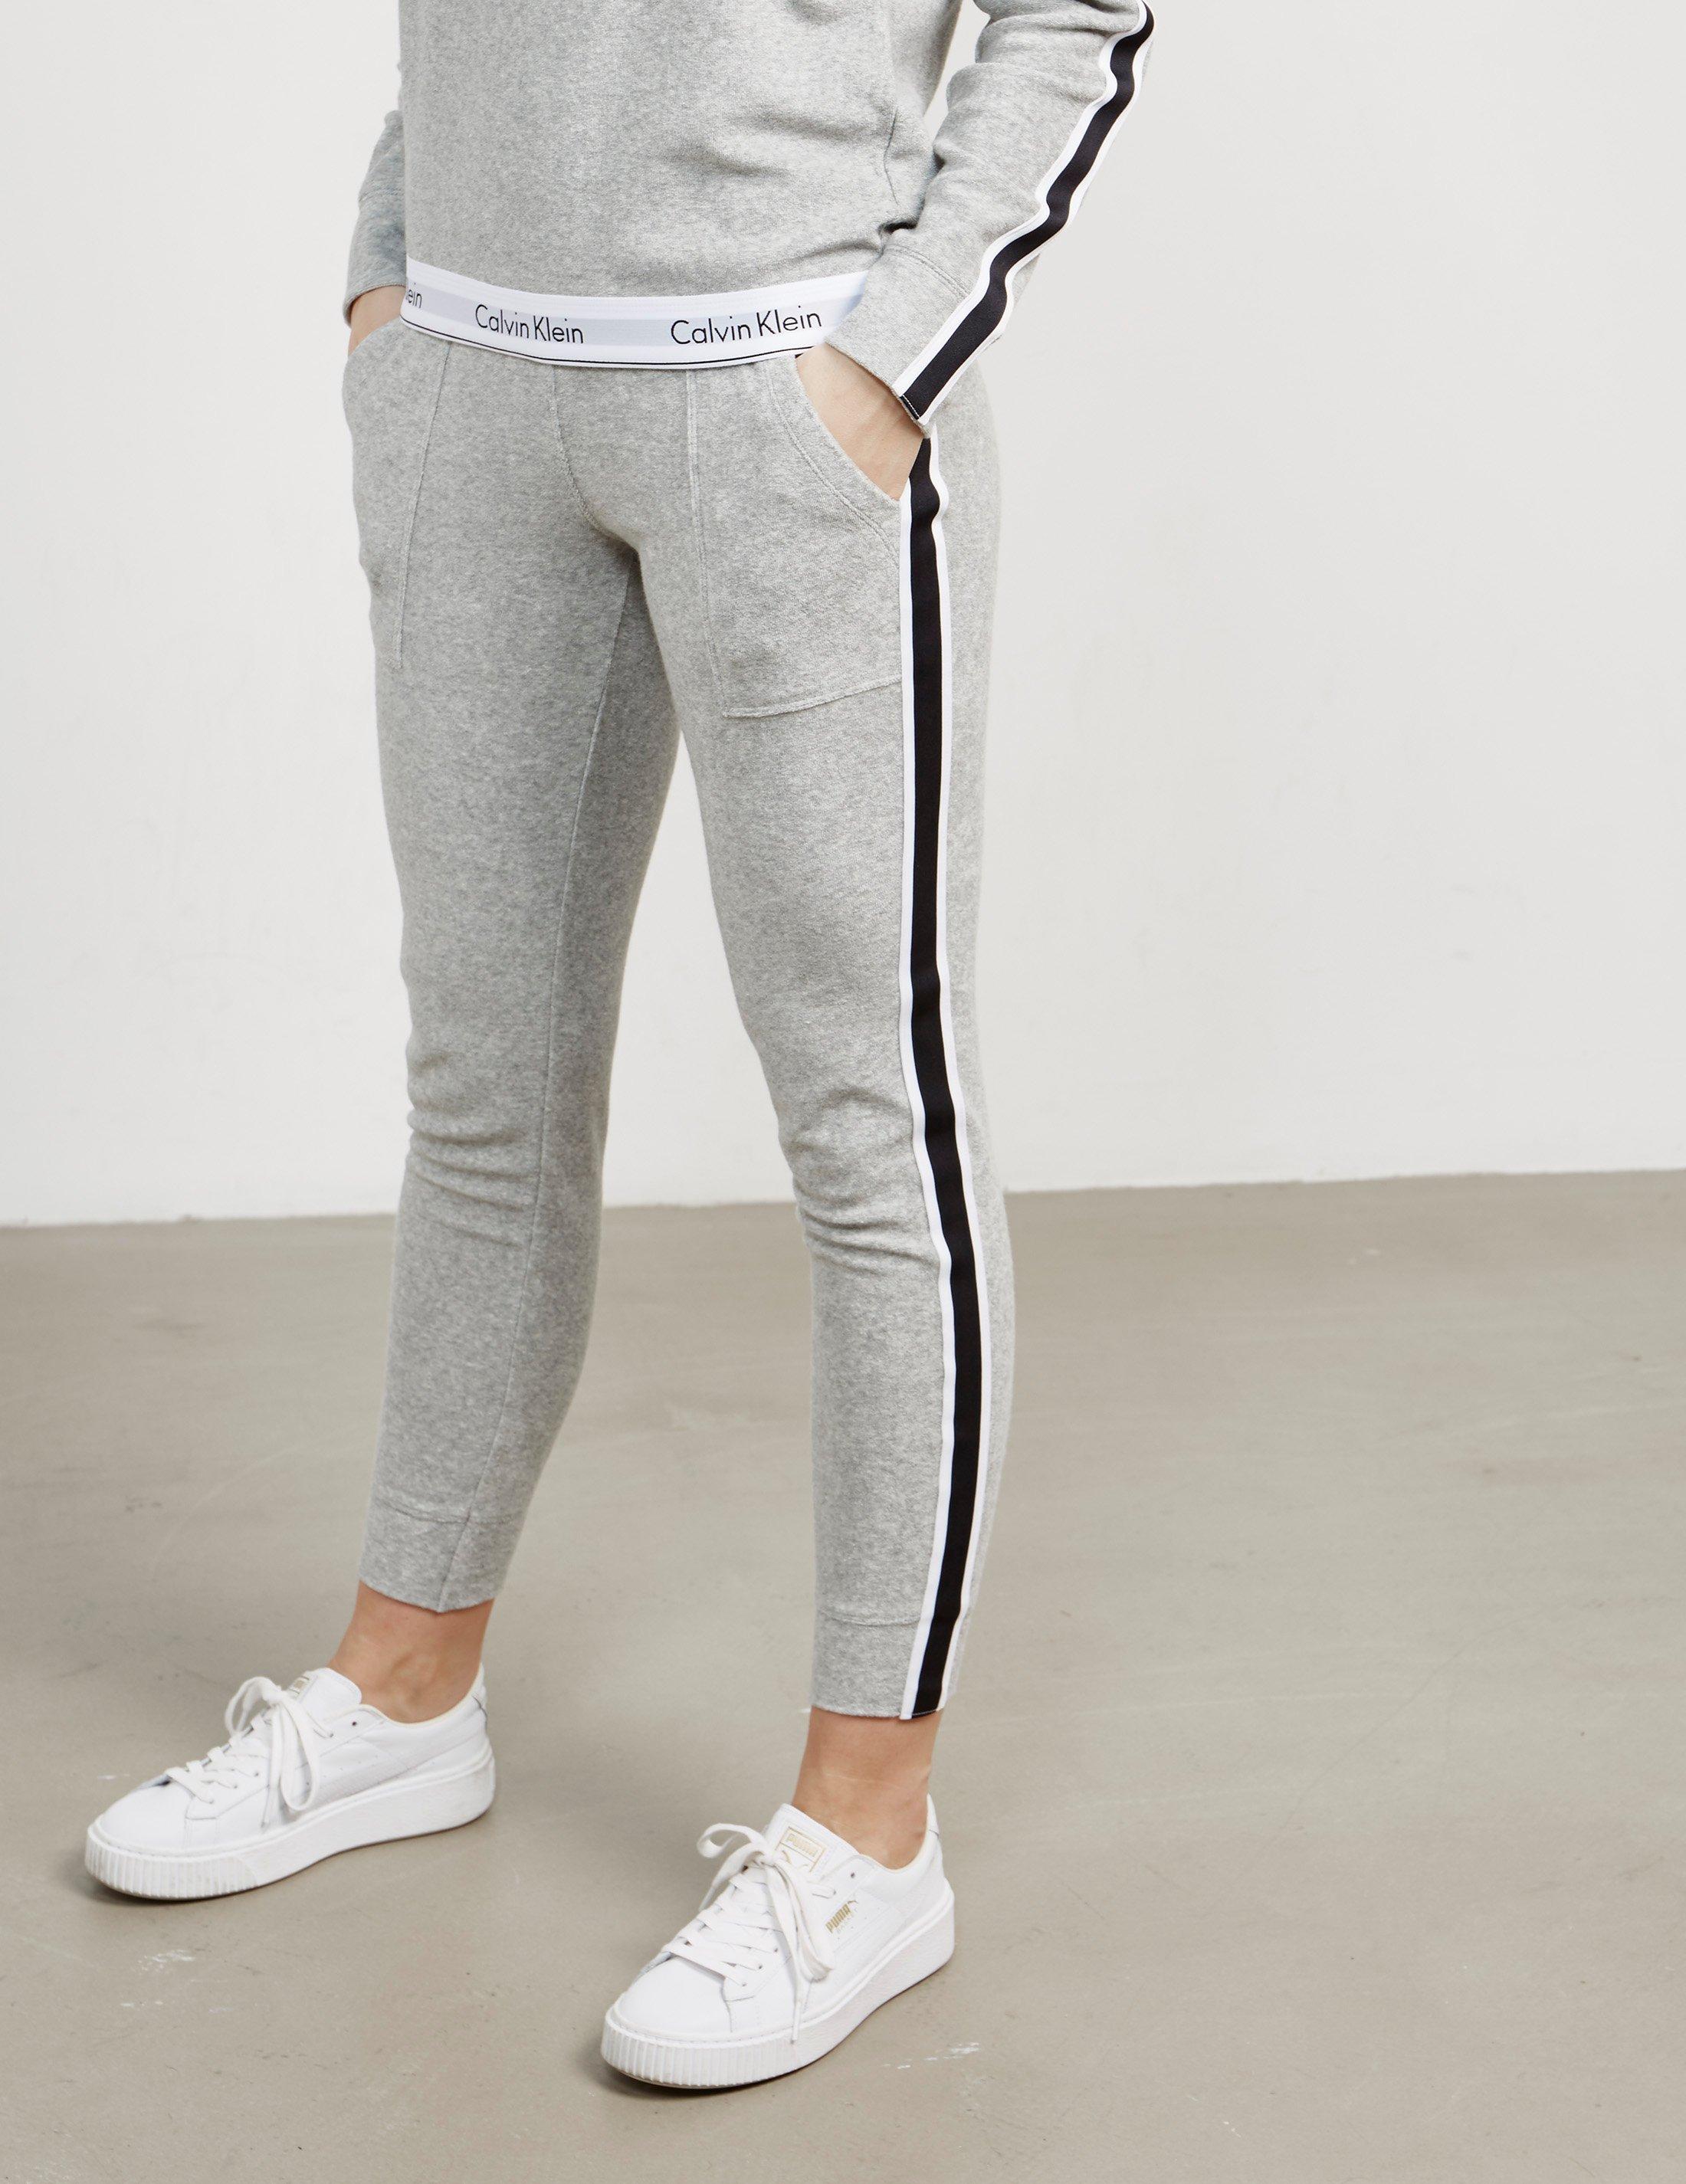 calvin klein grey tracksuit womens Online shopping has never been as easy!